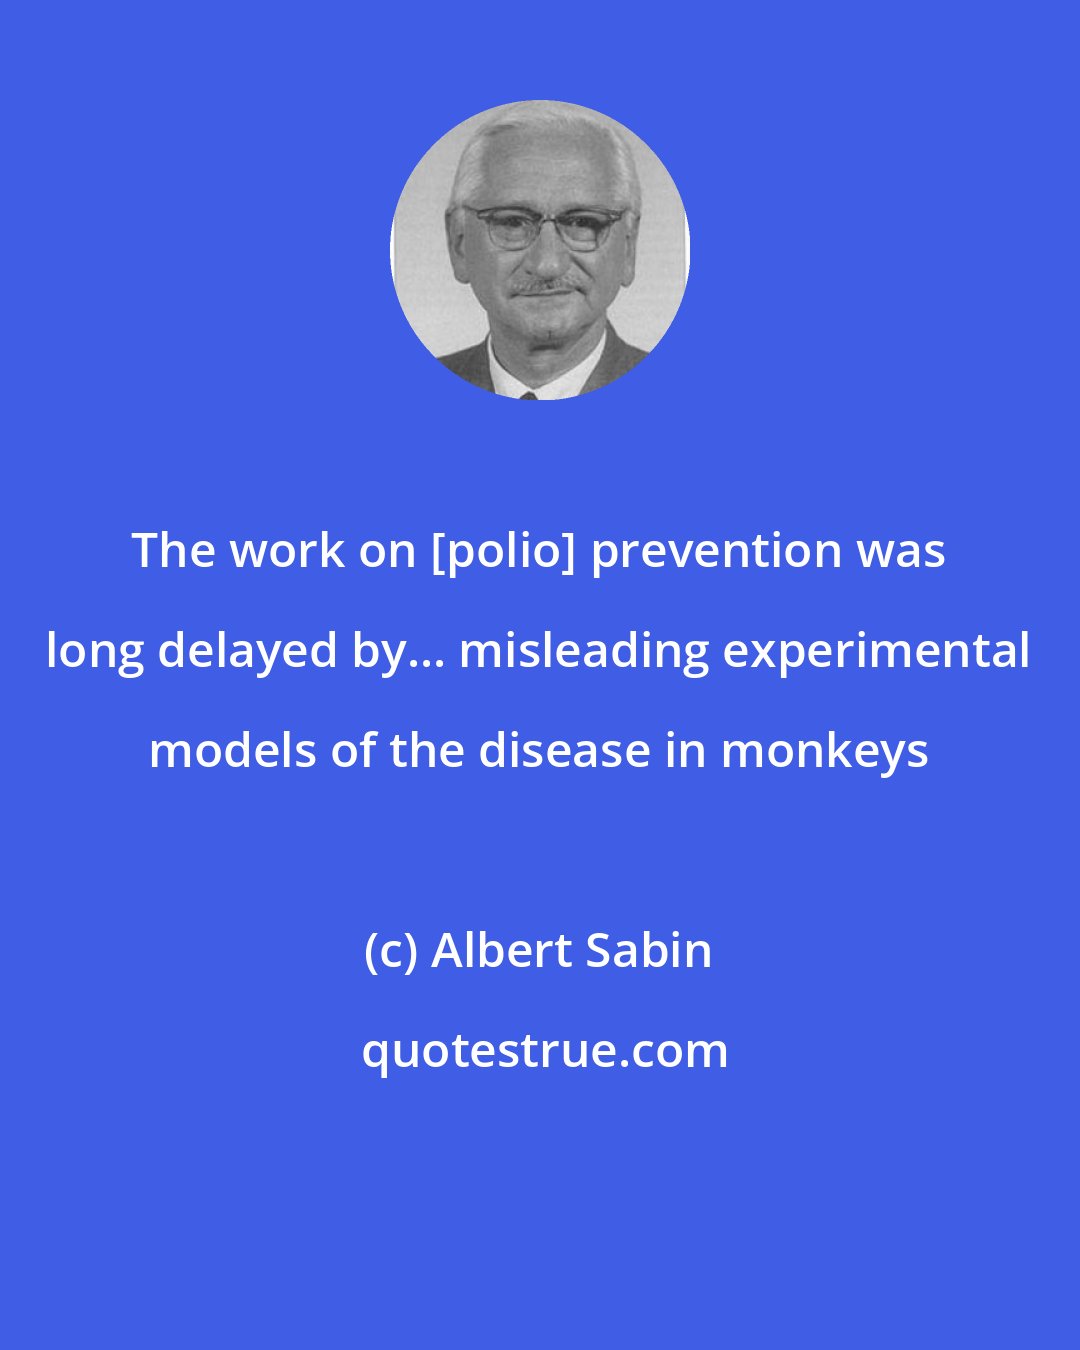 Albert Sabin: The work on [polio] prevention was long delayed by... misleading experimental models of the disease in monkeys